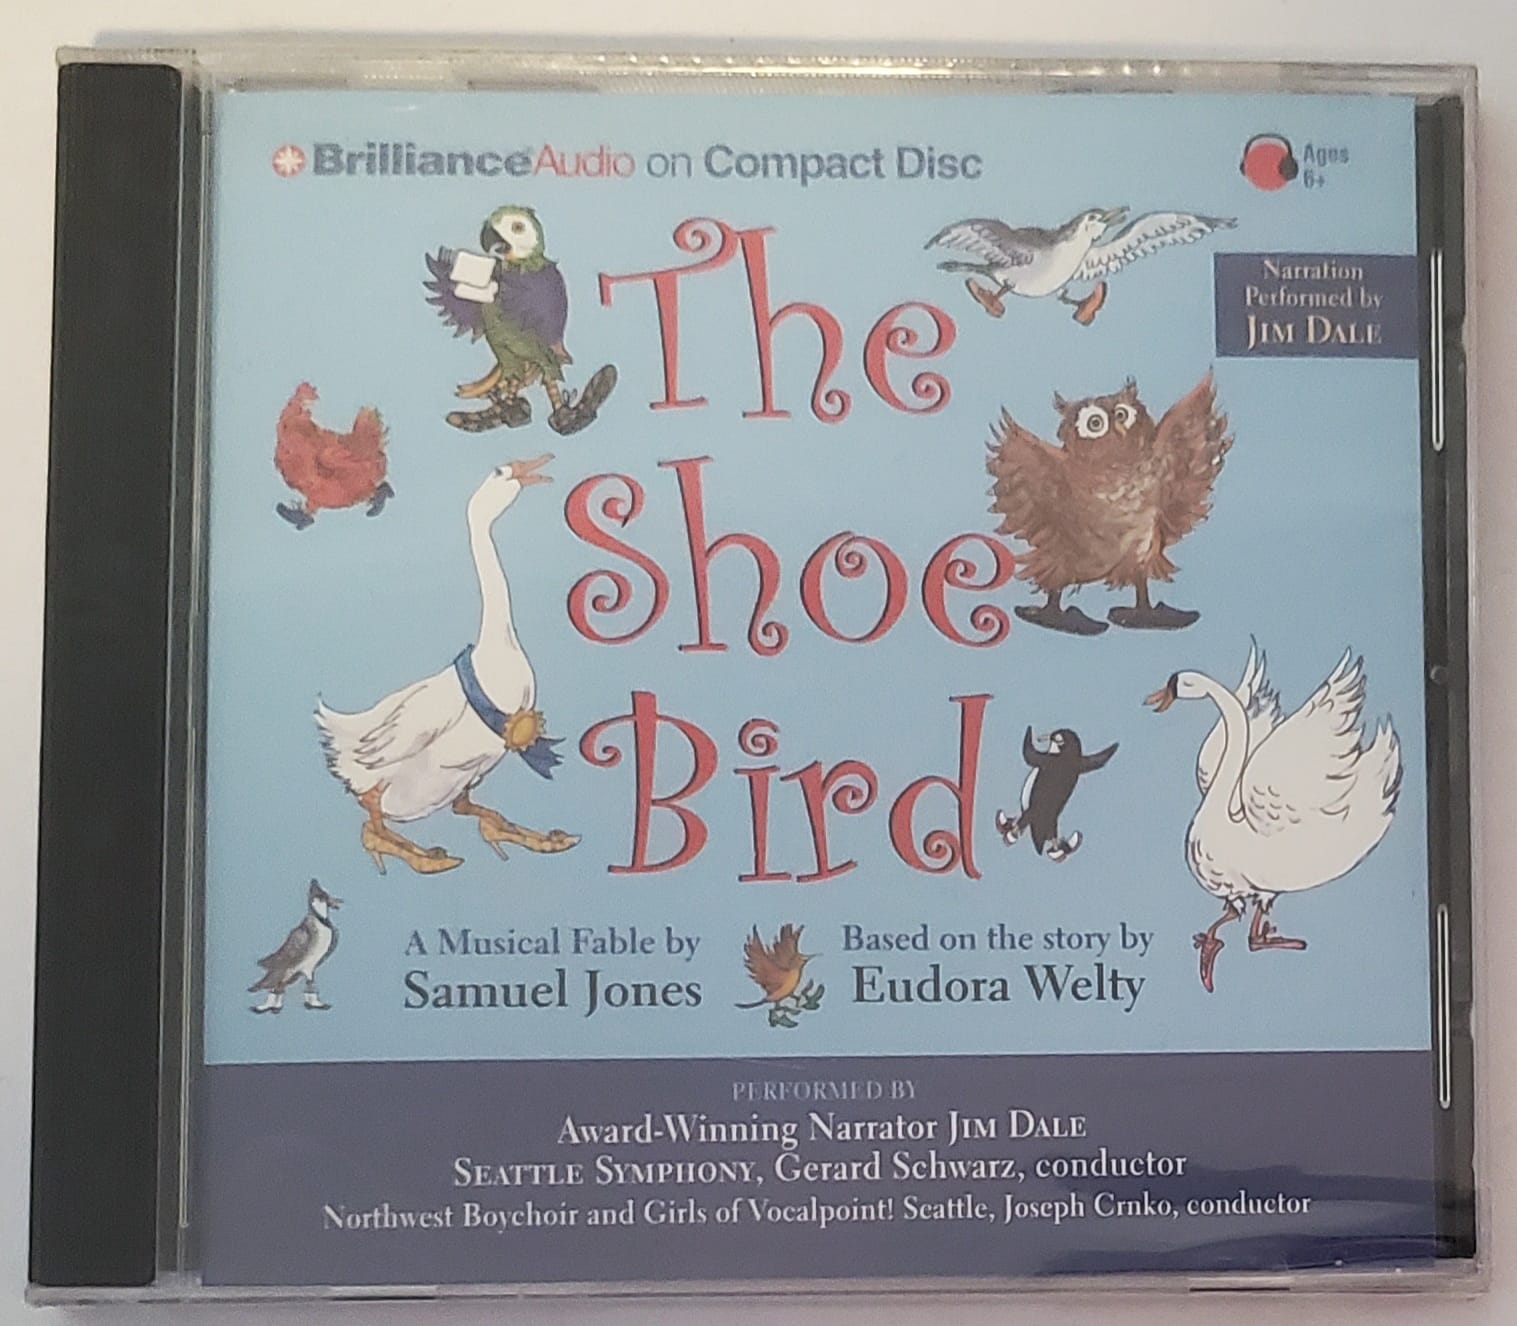 CD The Shoe Bird: A Musical Fable by Samuel Jones, Based on the story by Eduora Welty